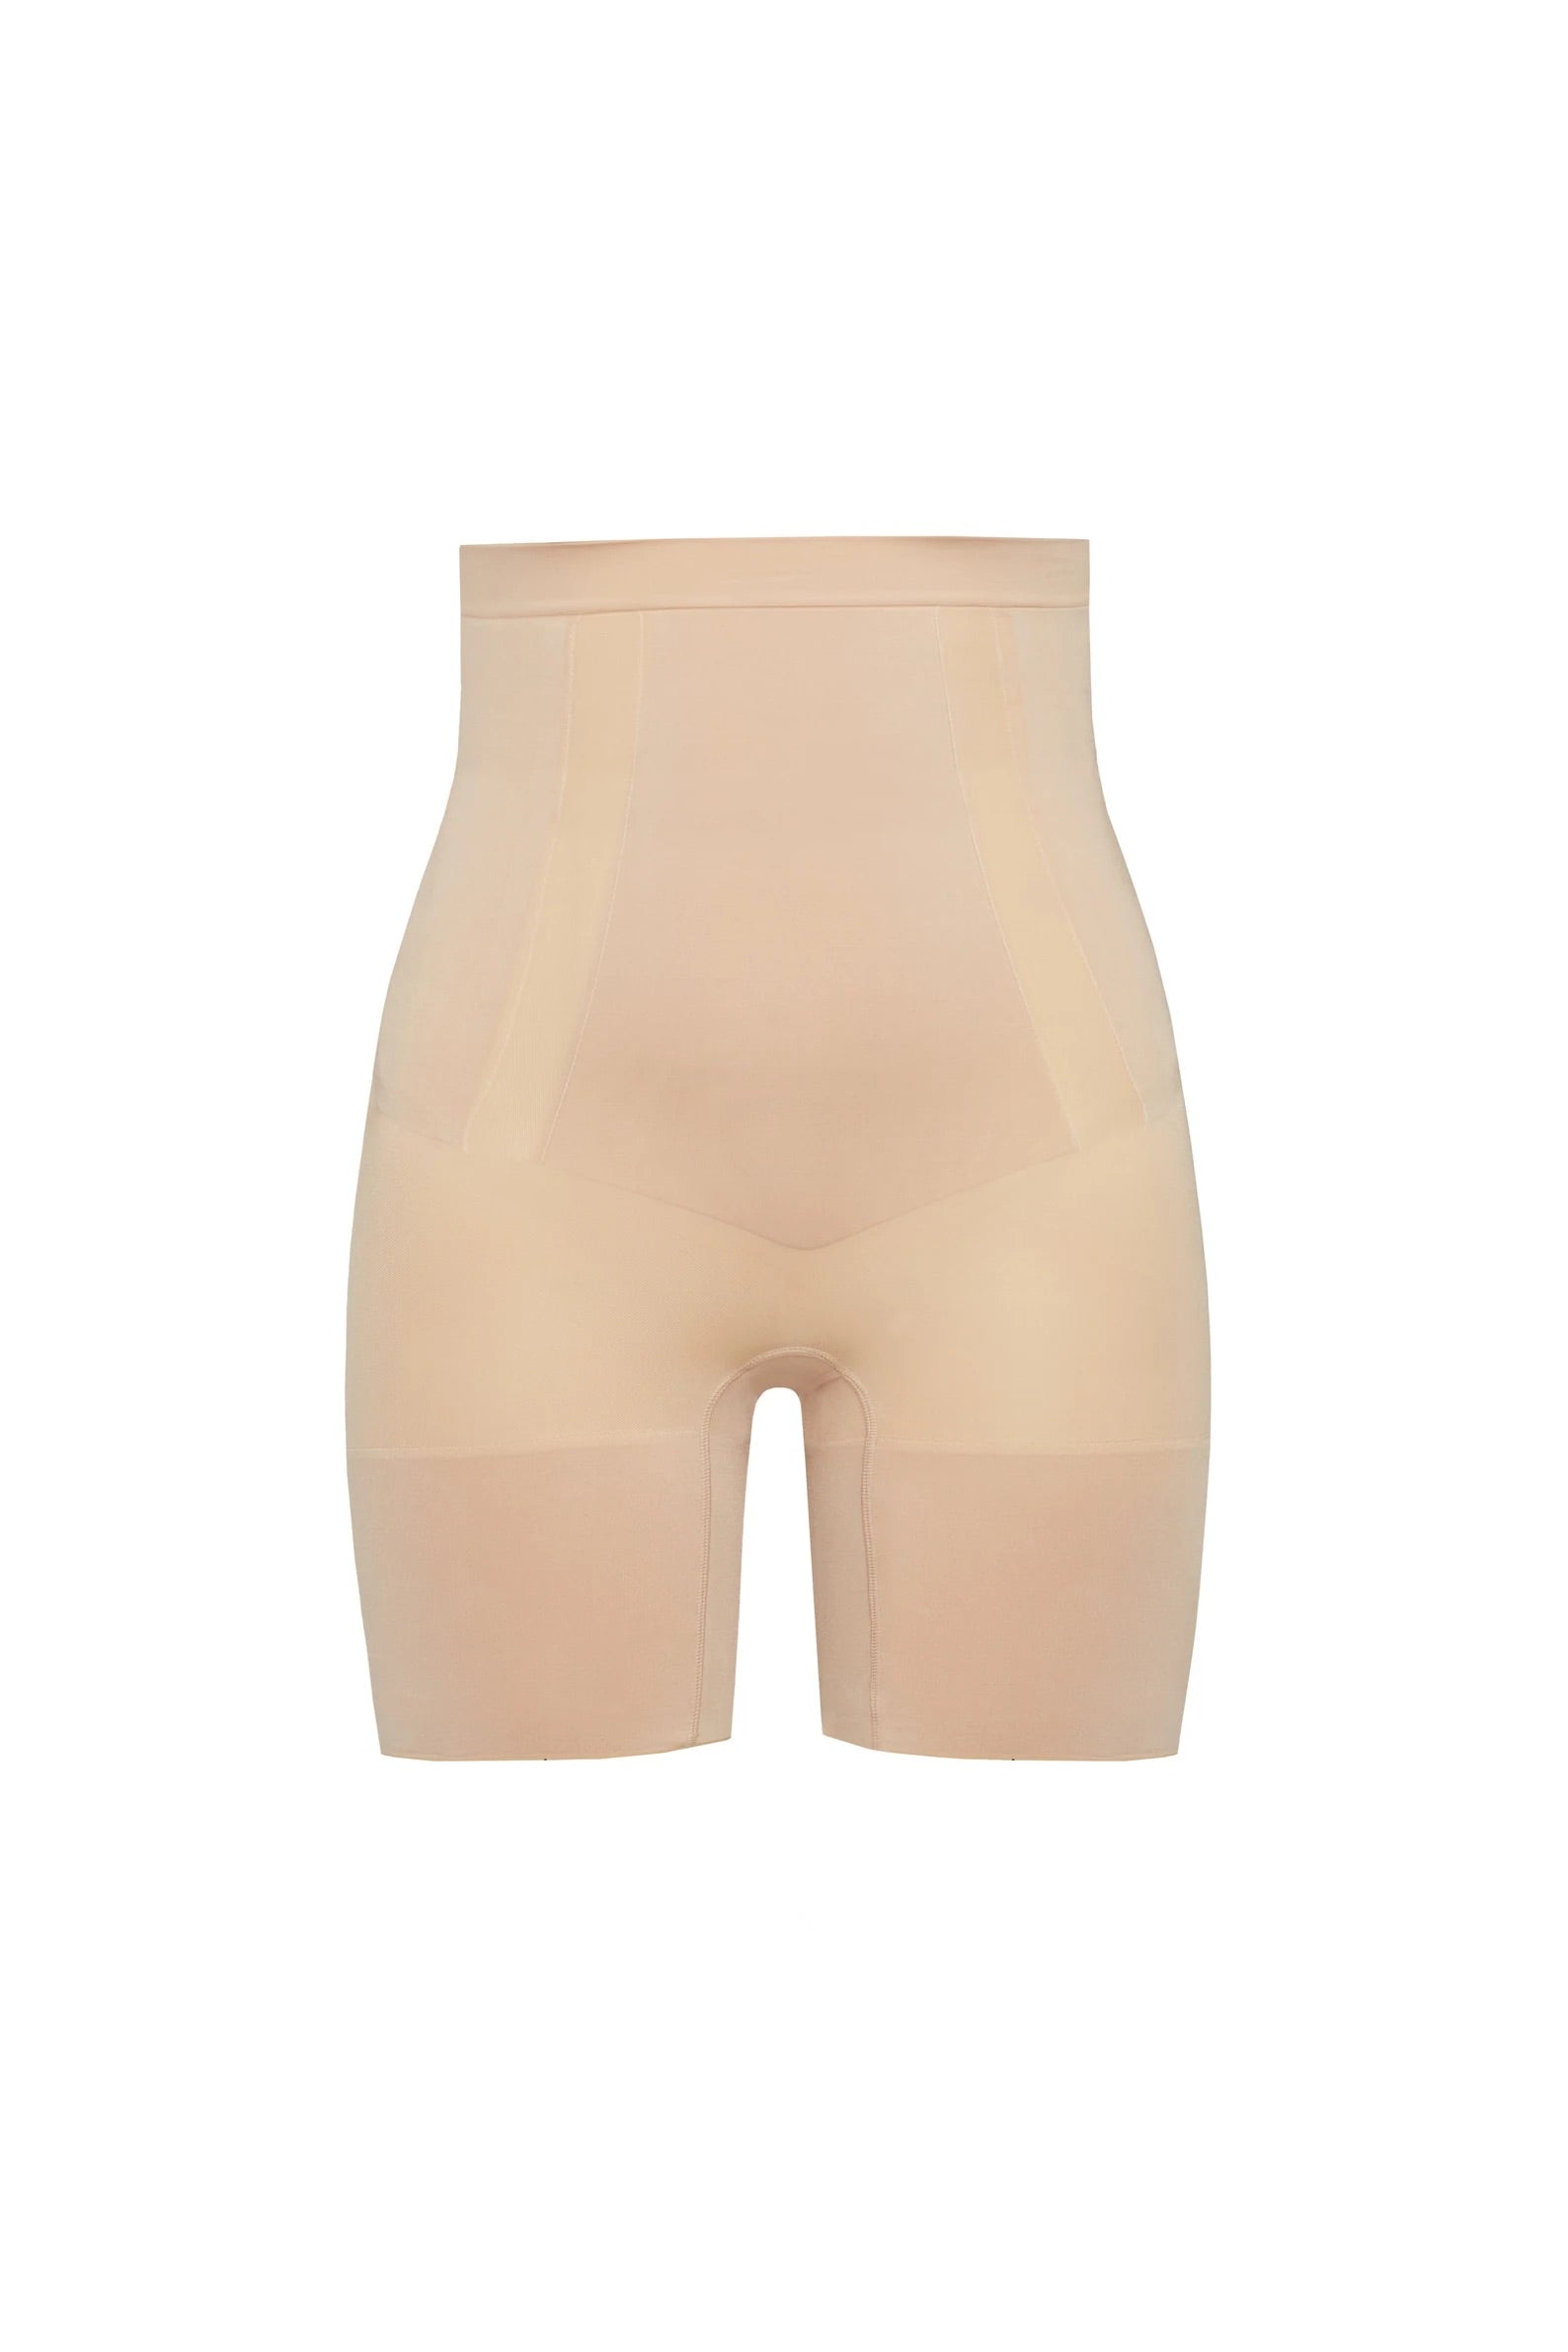 Oncore Hi Waisted Mid Thigh